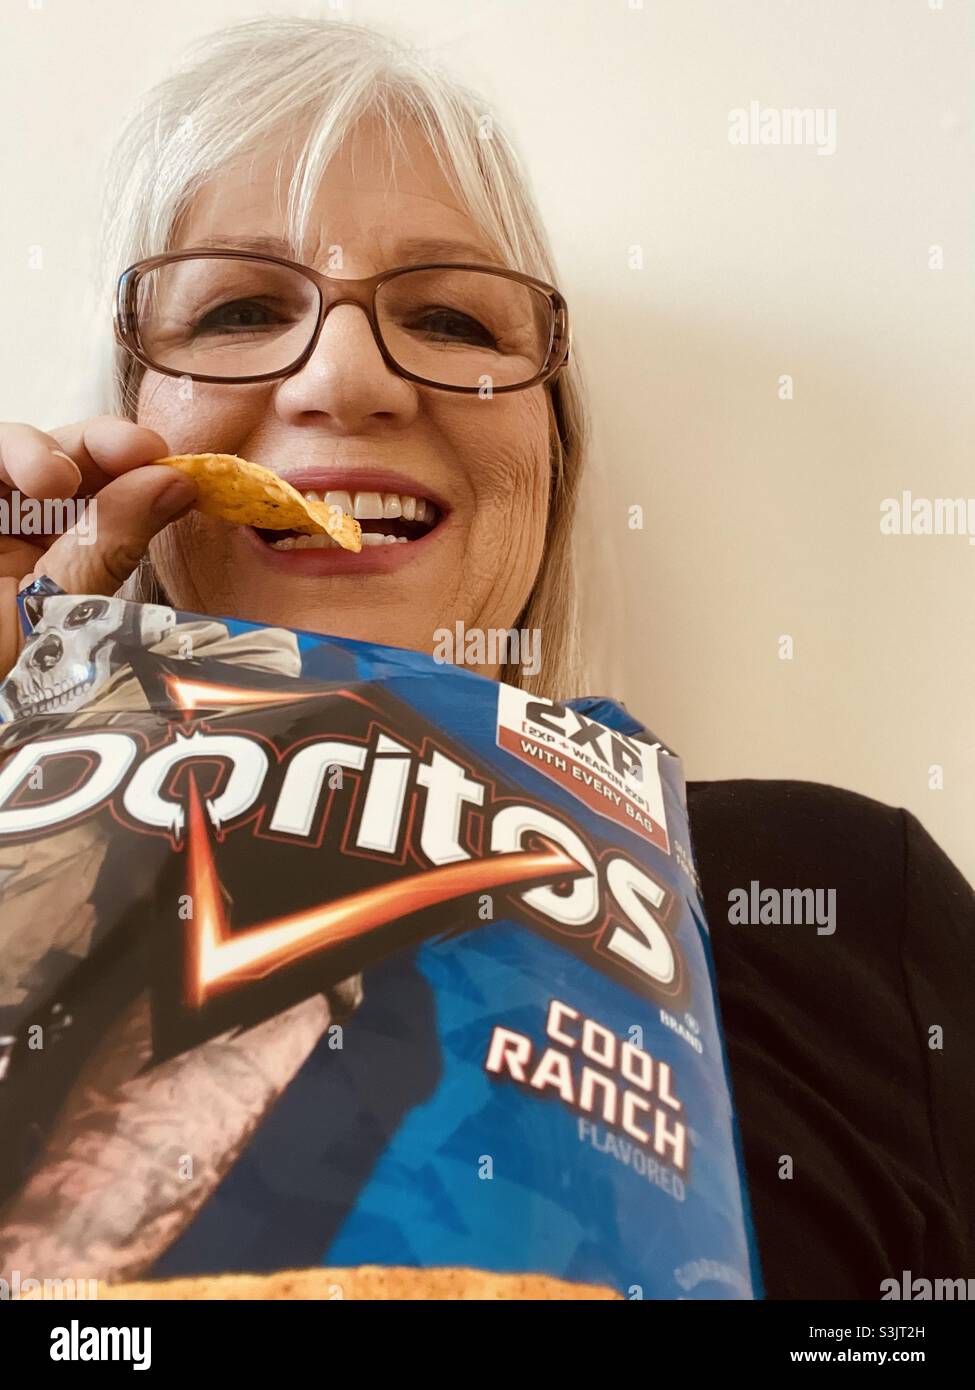 Light haired woman in glasses smiling as she eat Doritos cool Ranch chips  Stock Photo - Alamy